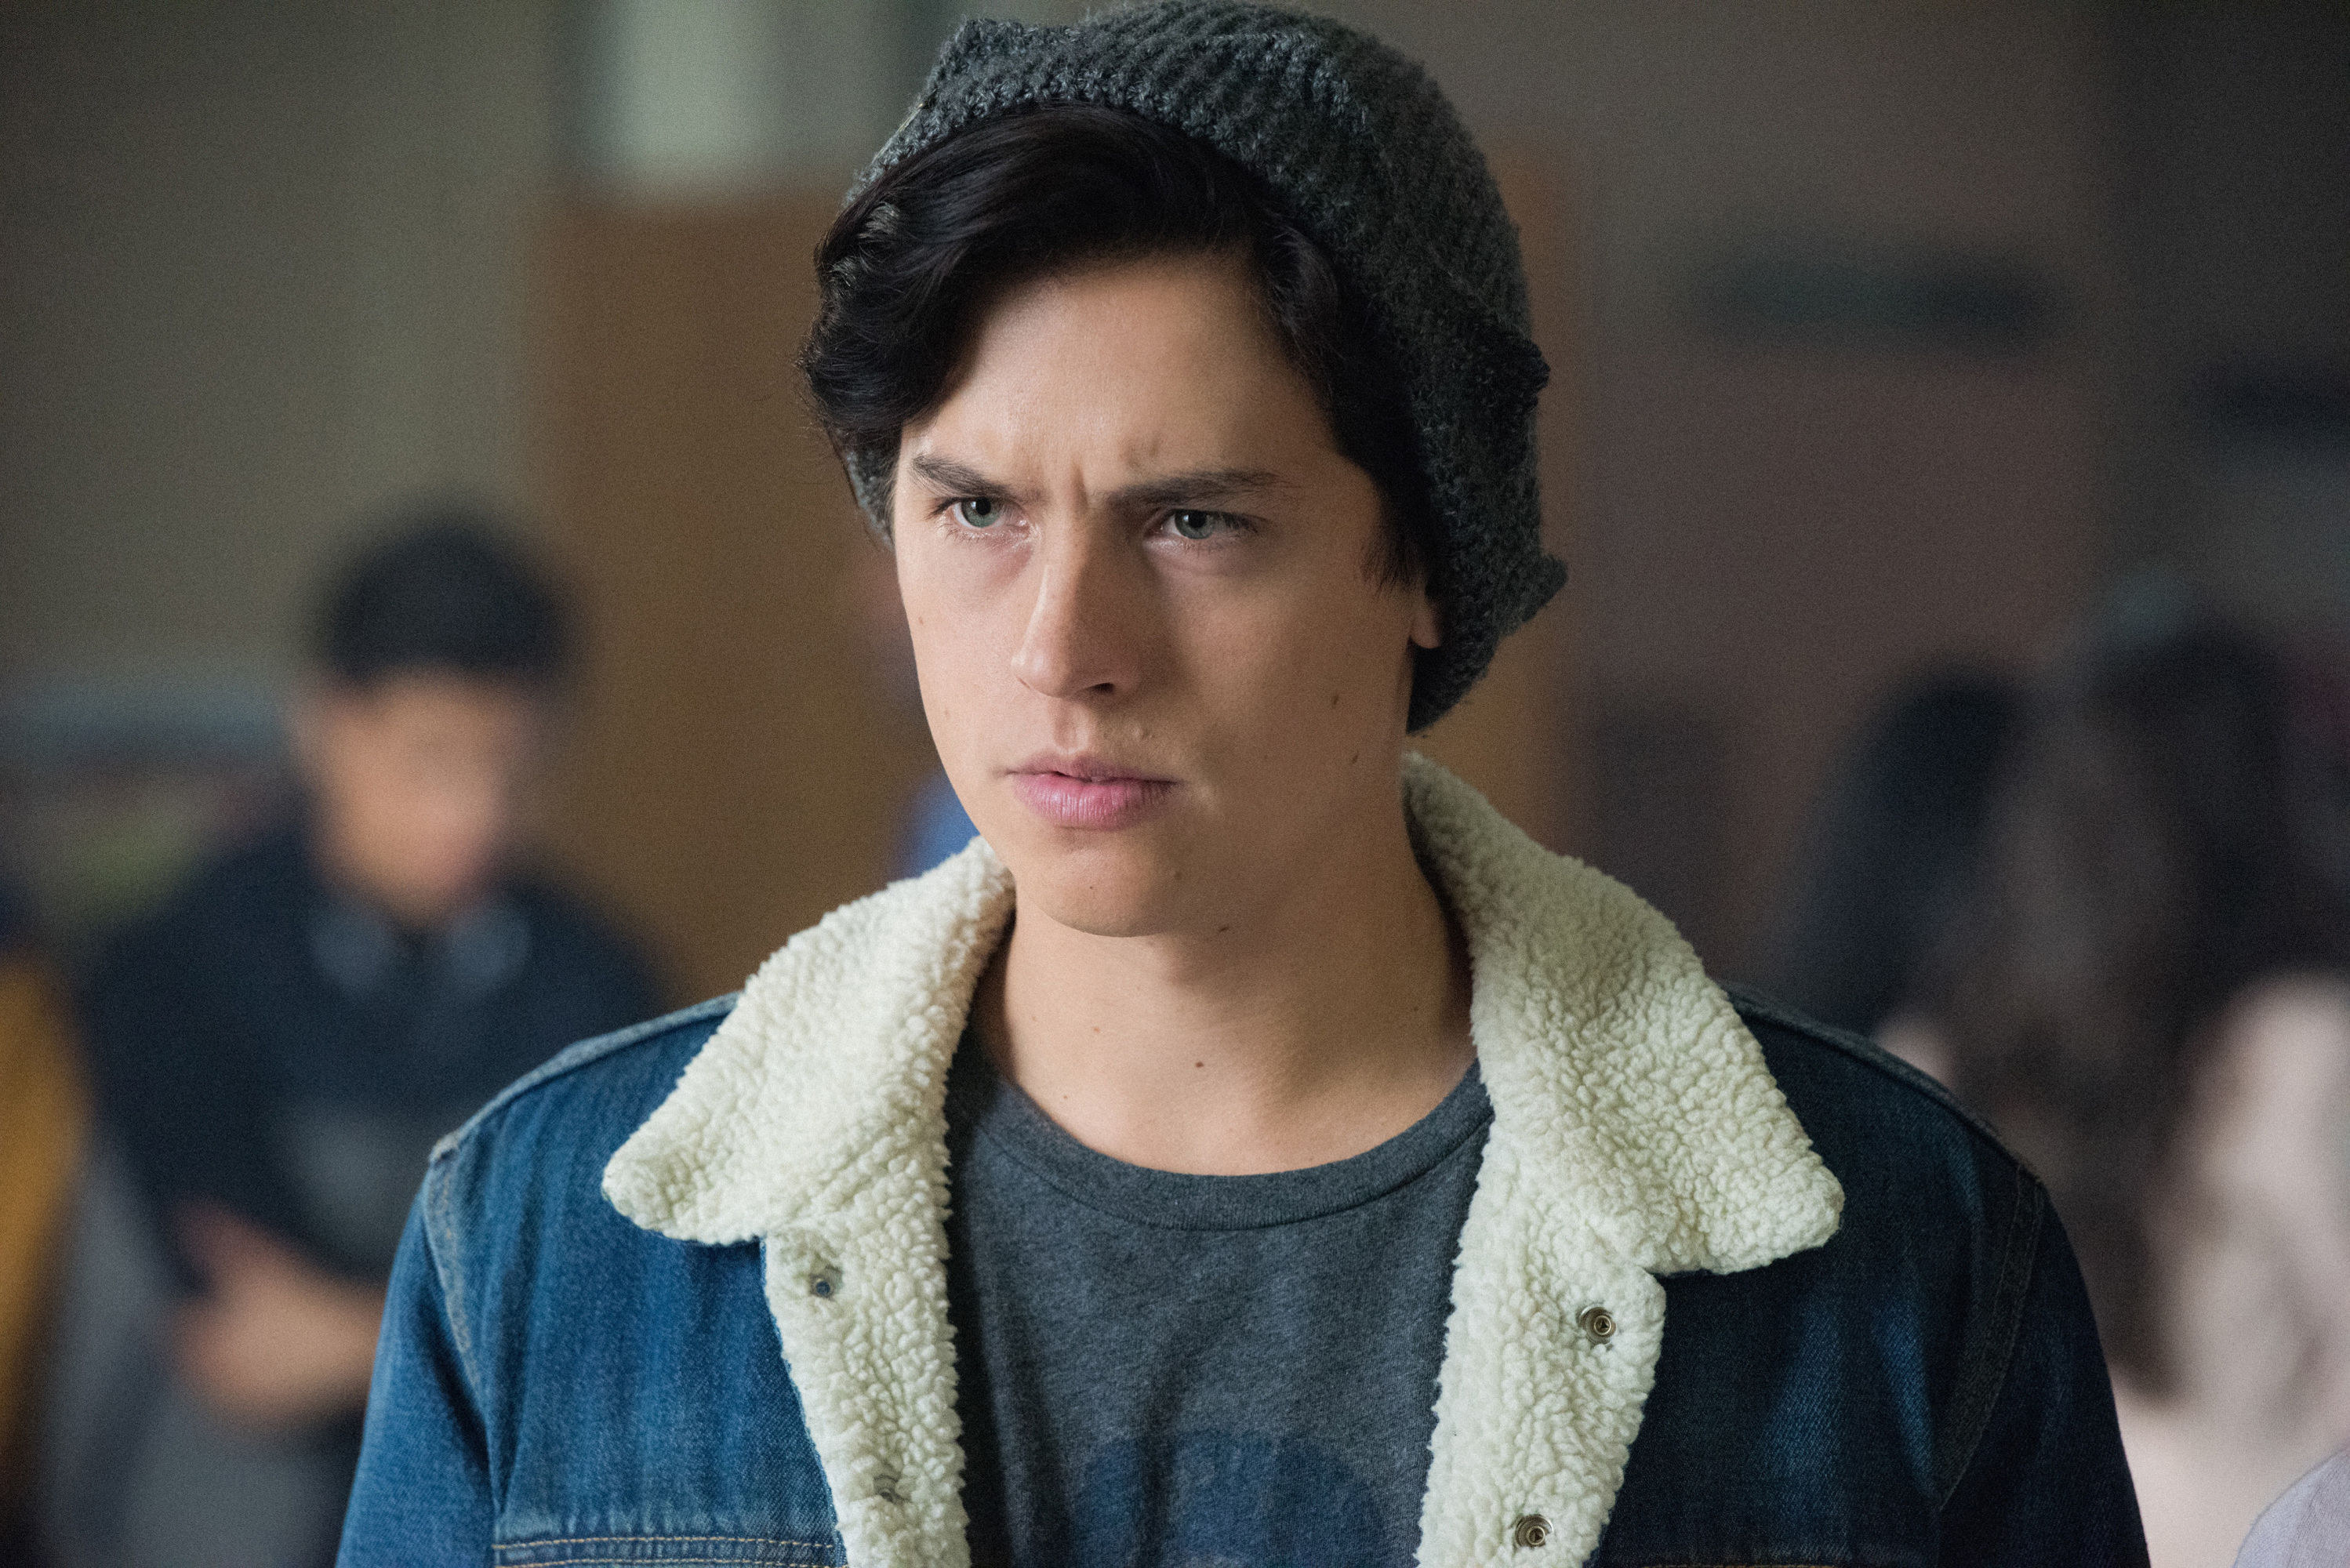 Cole in Riverdale